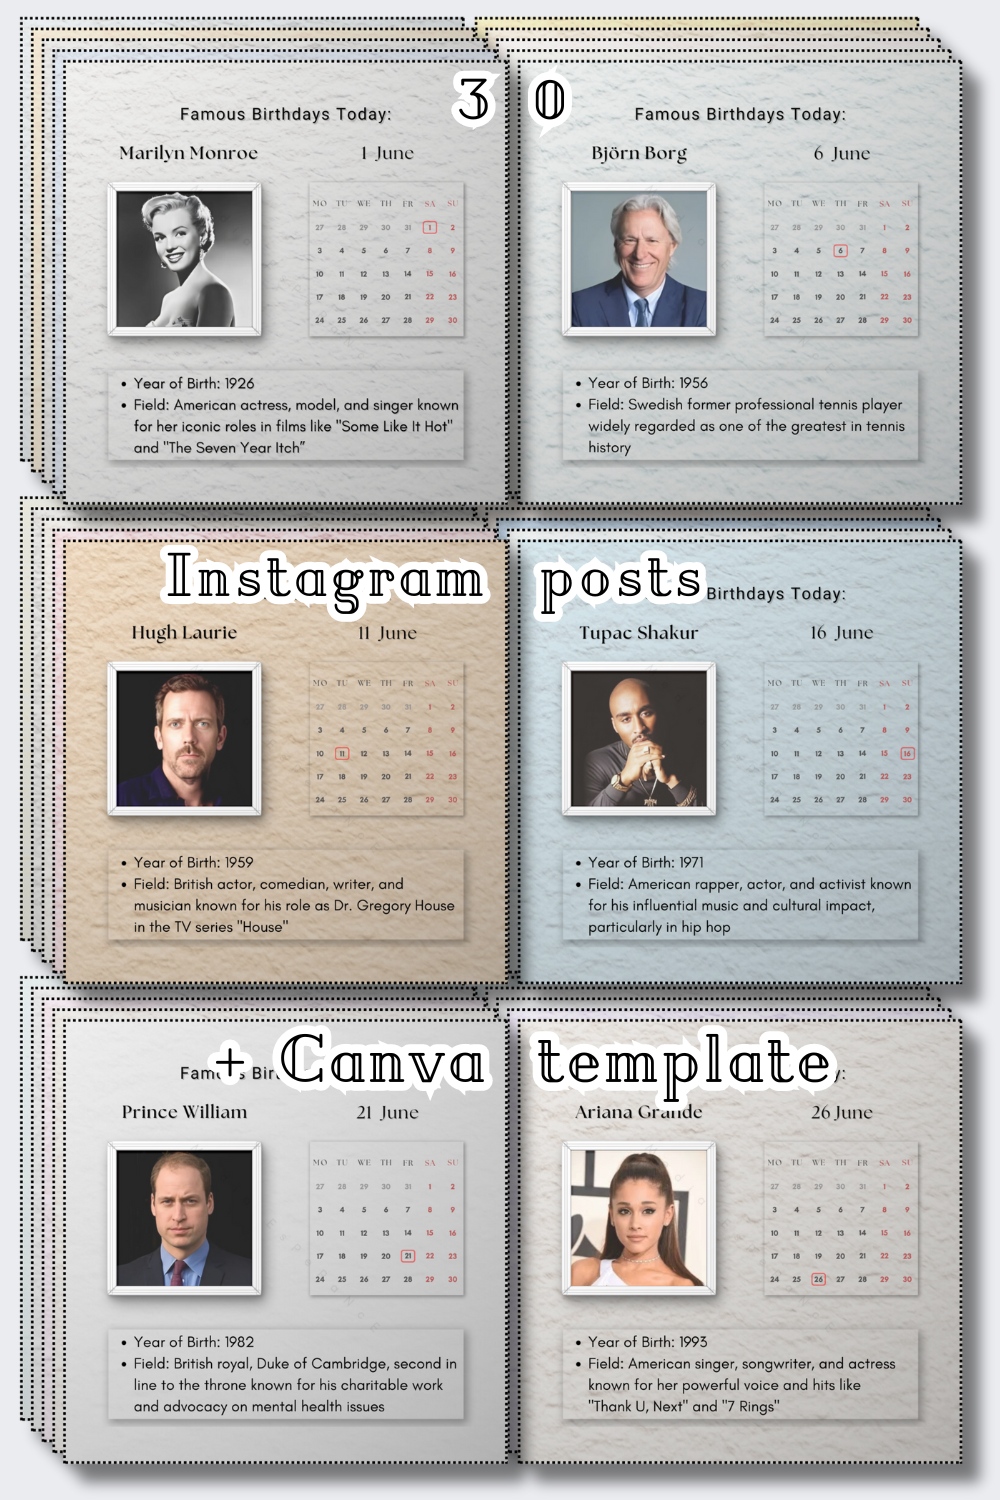 30 Instagram posts in soft tones with a 3D effect | 30 posts for June | "June Celebrities: A Post Kit Featuring Celebrities for Each Day of the Month" | Canva template pinterest preview image.